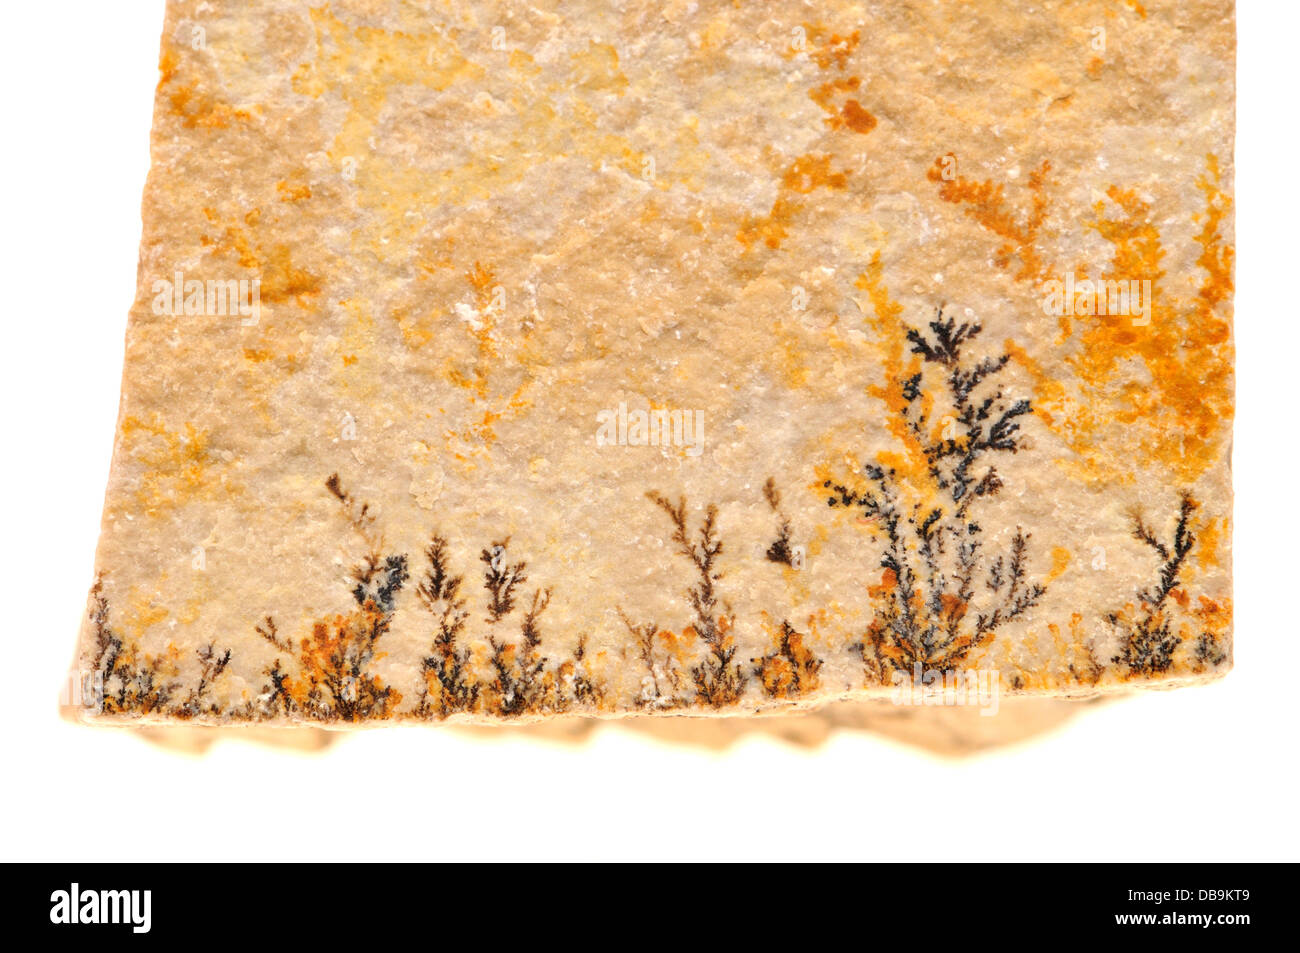 Dendritic Pyrolusite crystals (manganese oxide) on rock surface Stock Photo